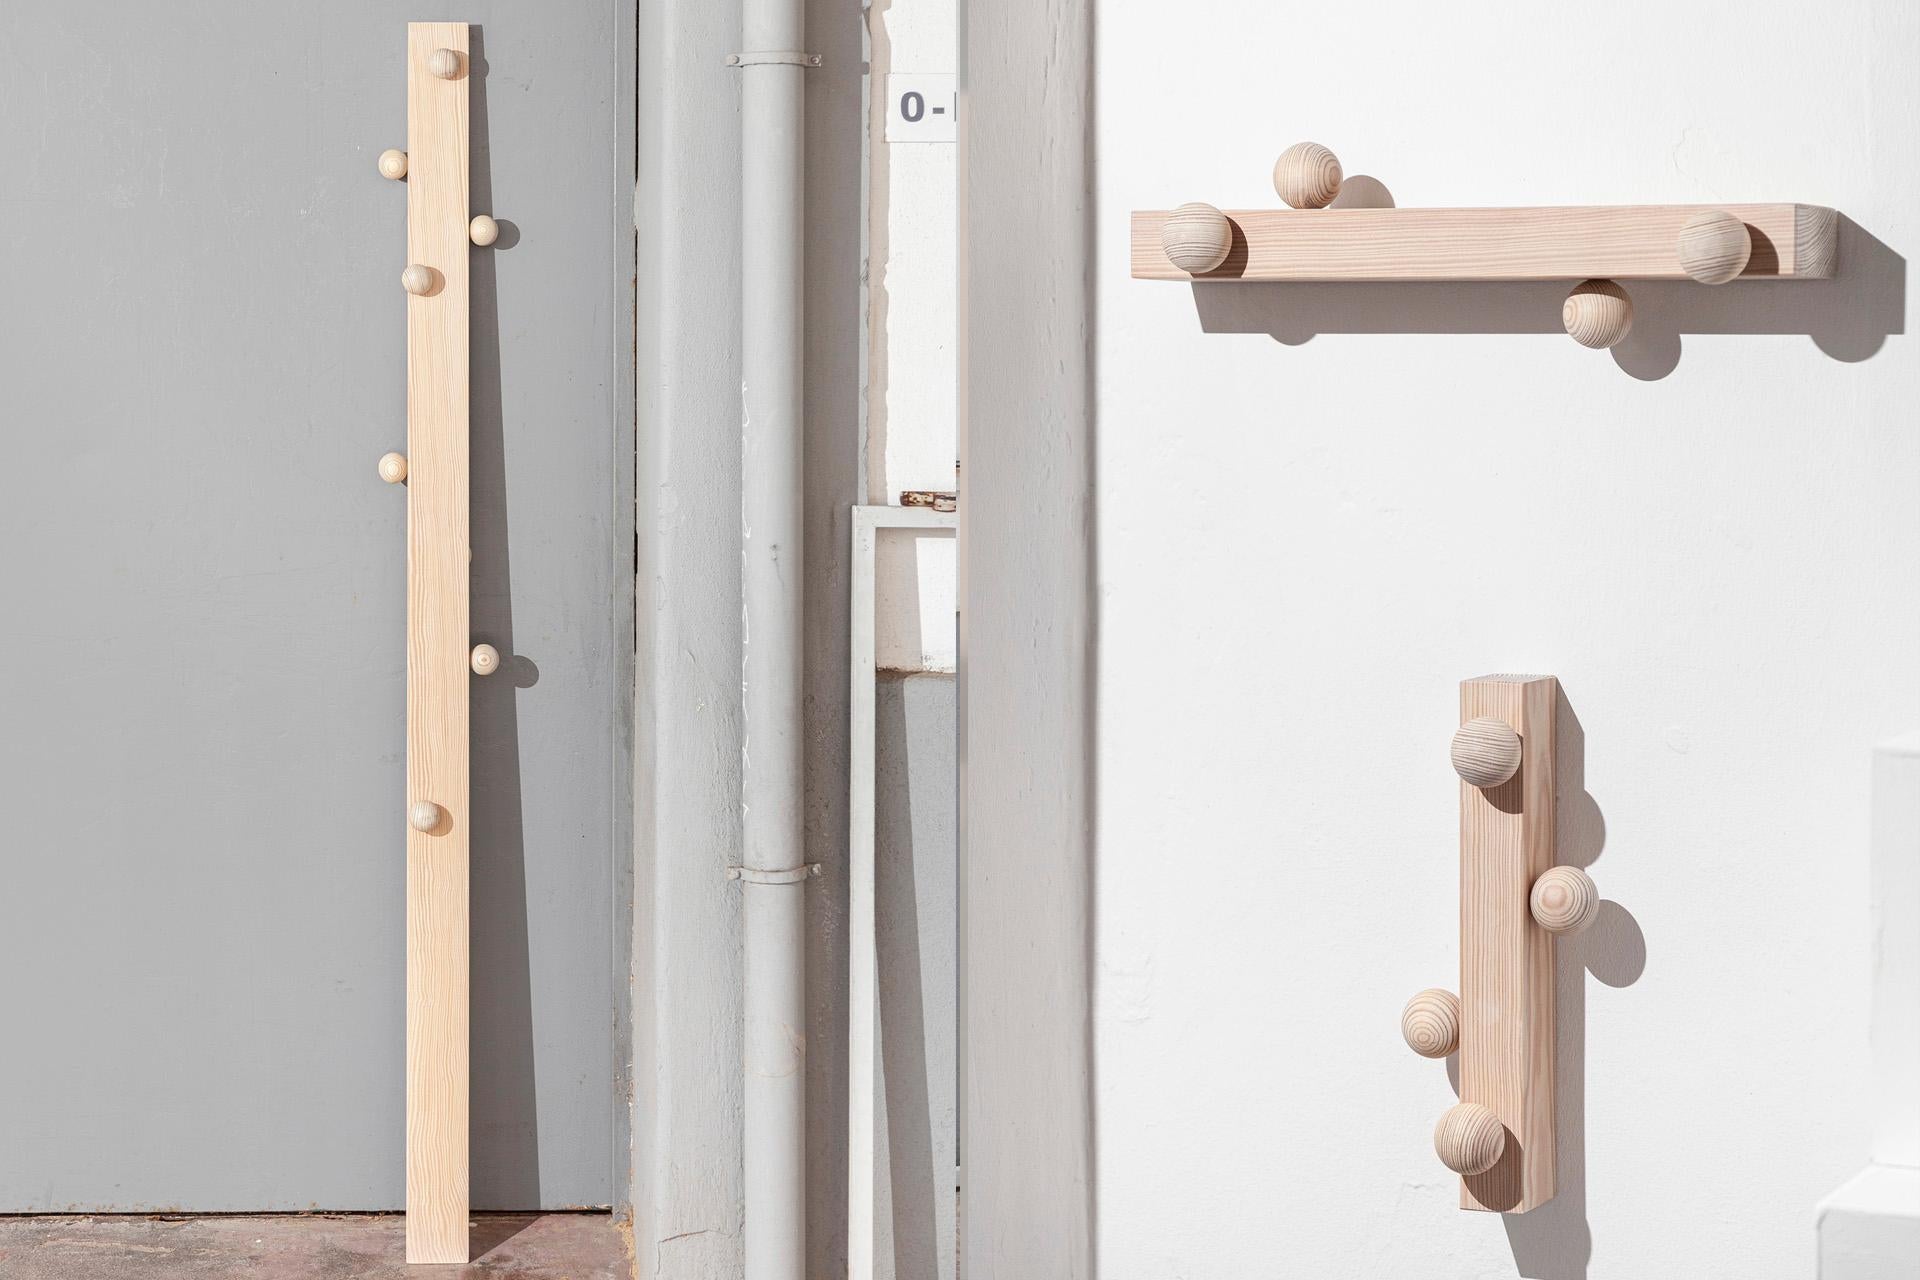 Woodwork Burly - Natural Pine Wood Coat Hanger by João Xará Handmade in Portugal For Sale